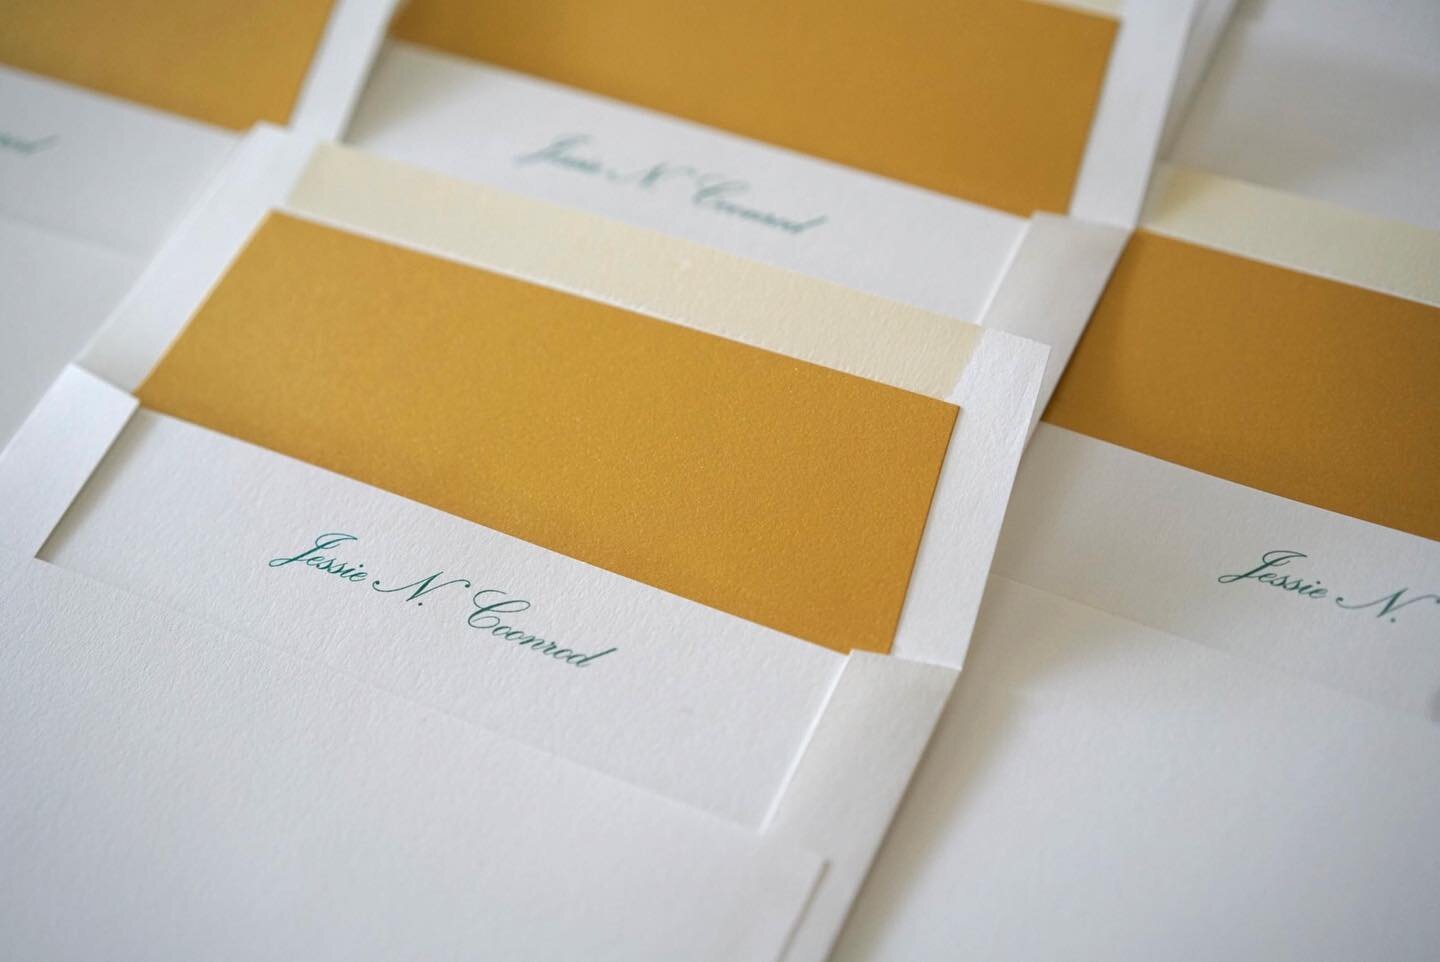 Yellow + Green for spring 💛🍃 classic stationery with a colorful twist 💌
-
#xitlallimade #paperlove #personalizedstationery #stationeryaddict #bespokestationery #notecards #personalizedgifts #stationery #finepapergoods #stationerydesign #cockatoolo